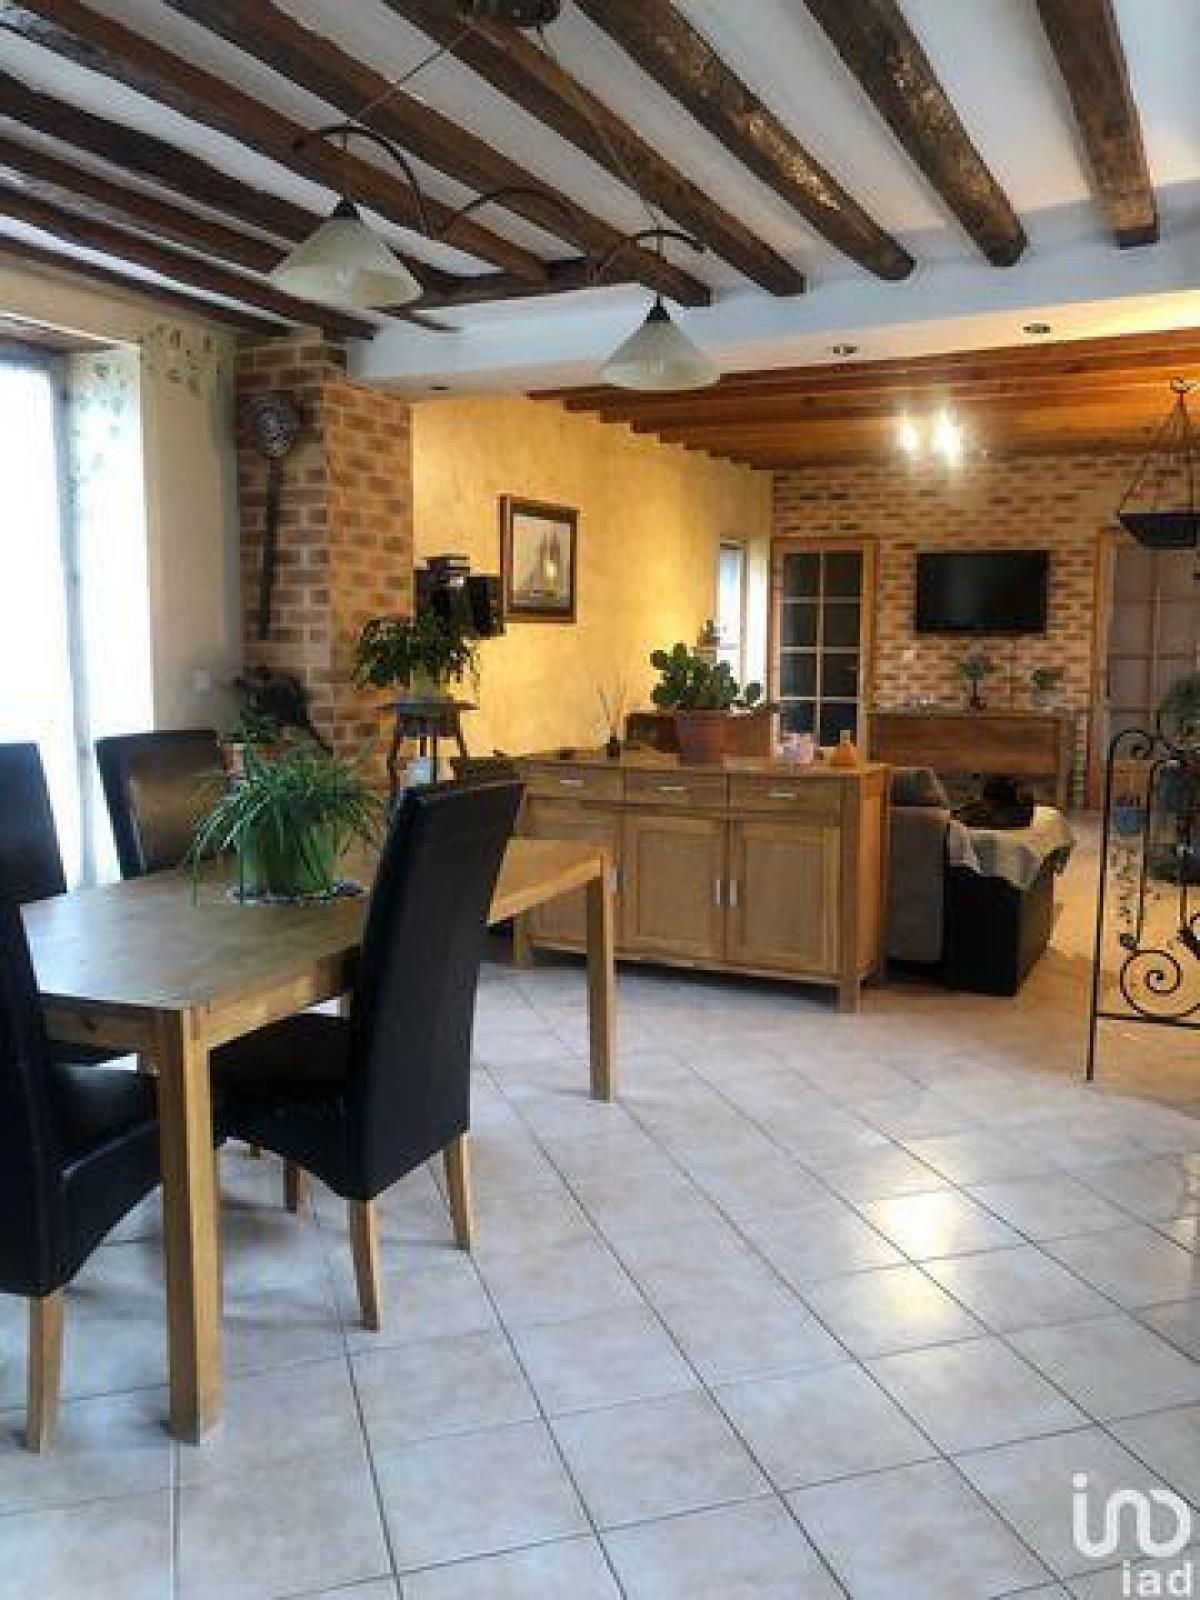 Picture of Home For Sale in Chambly, Picardie, France